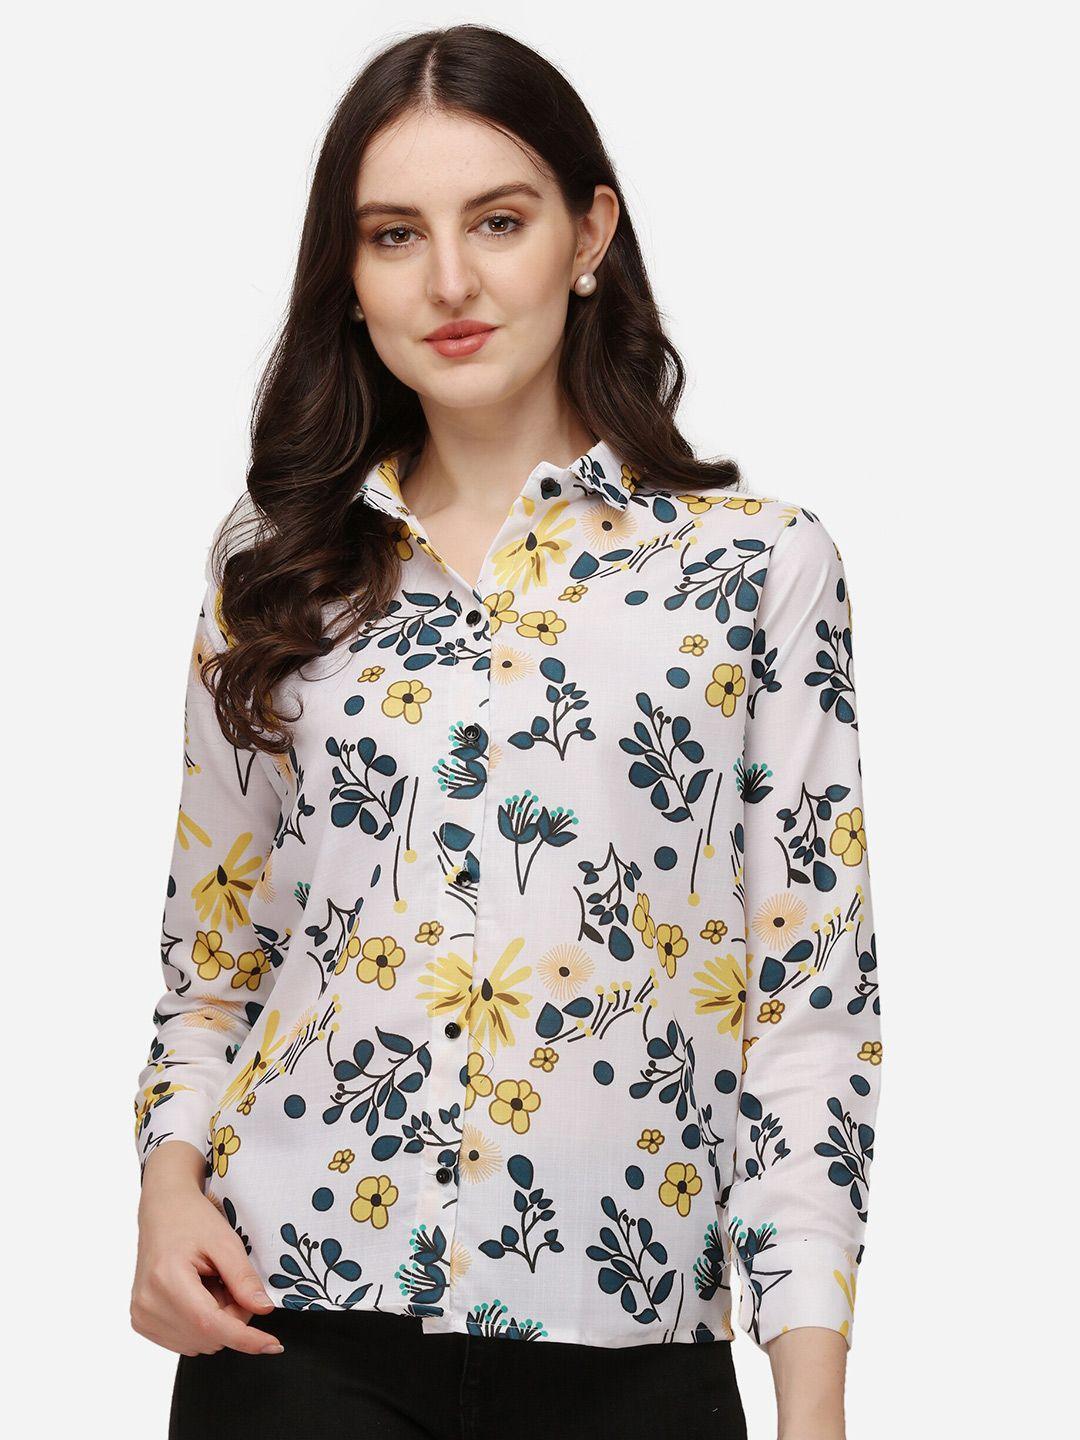 getchi women comfort floral opaque printed party shirt